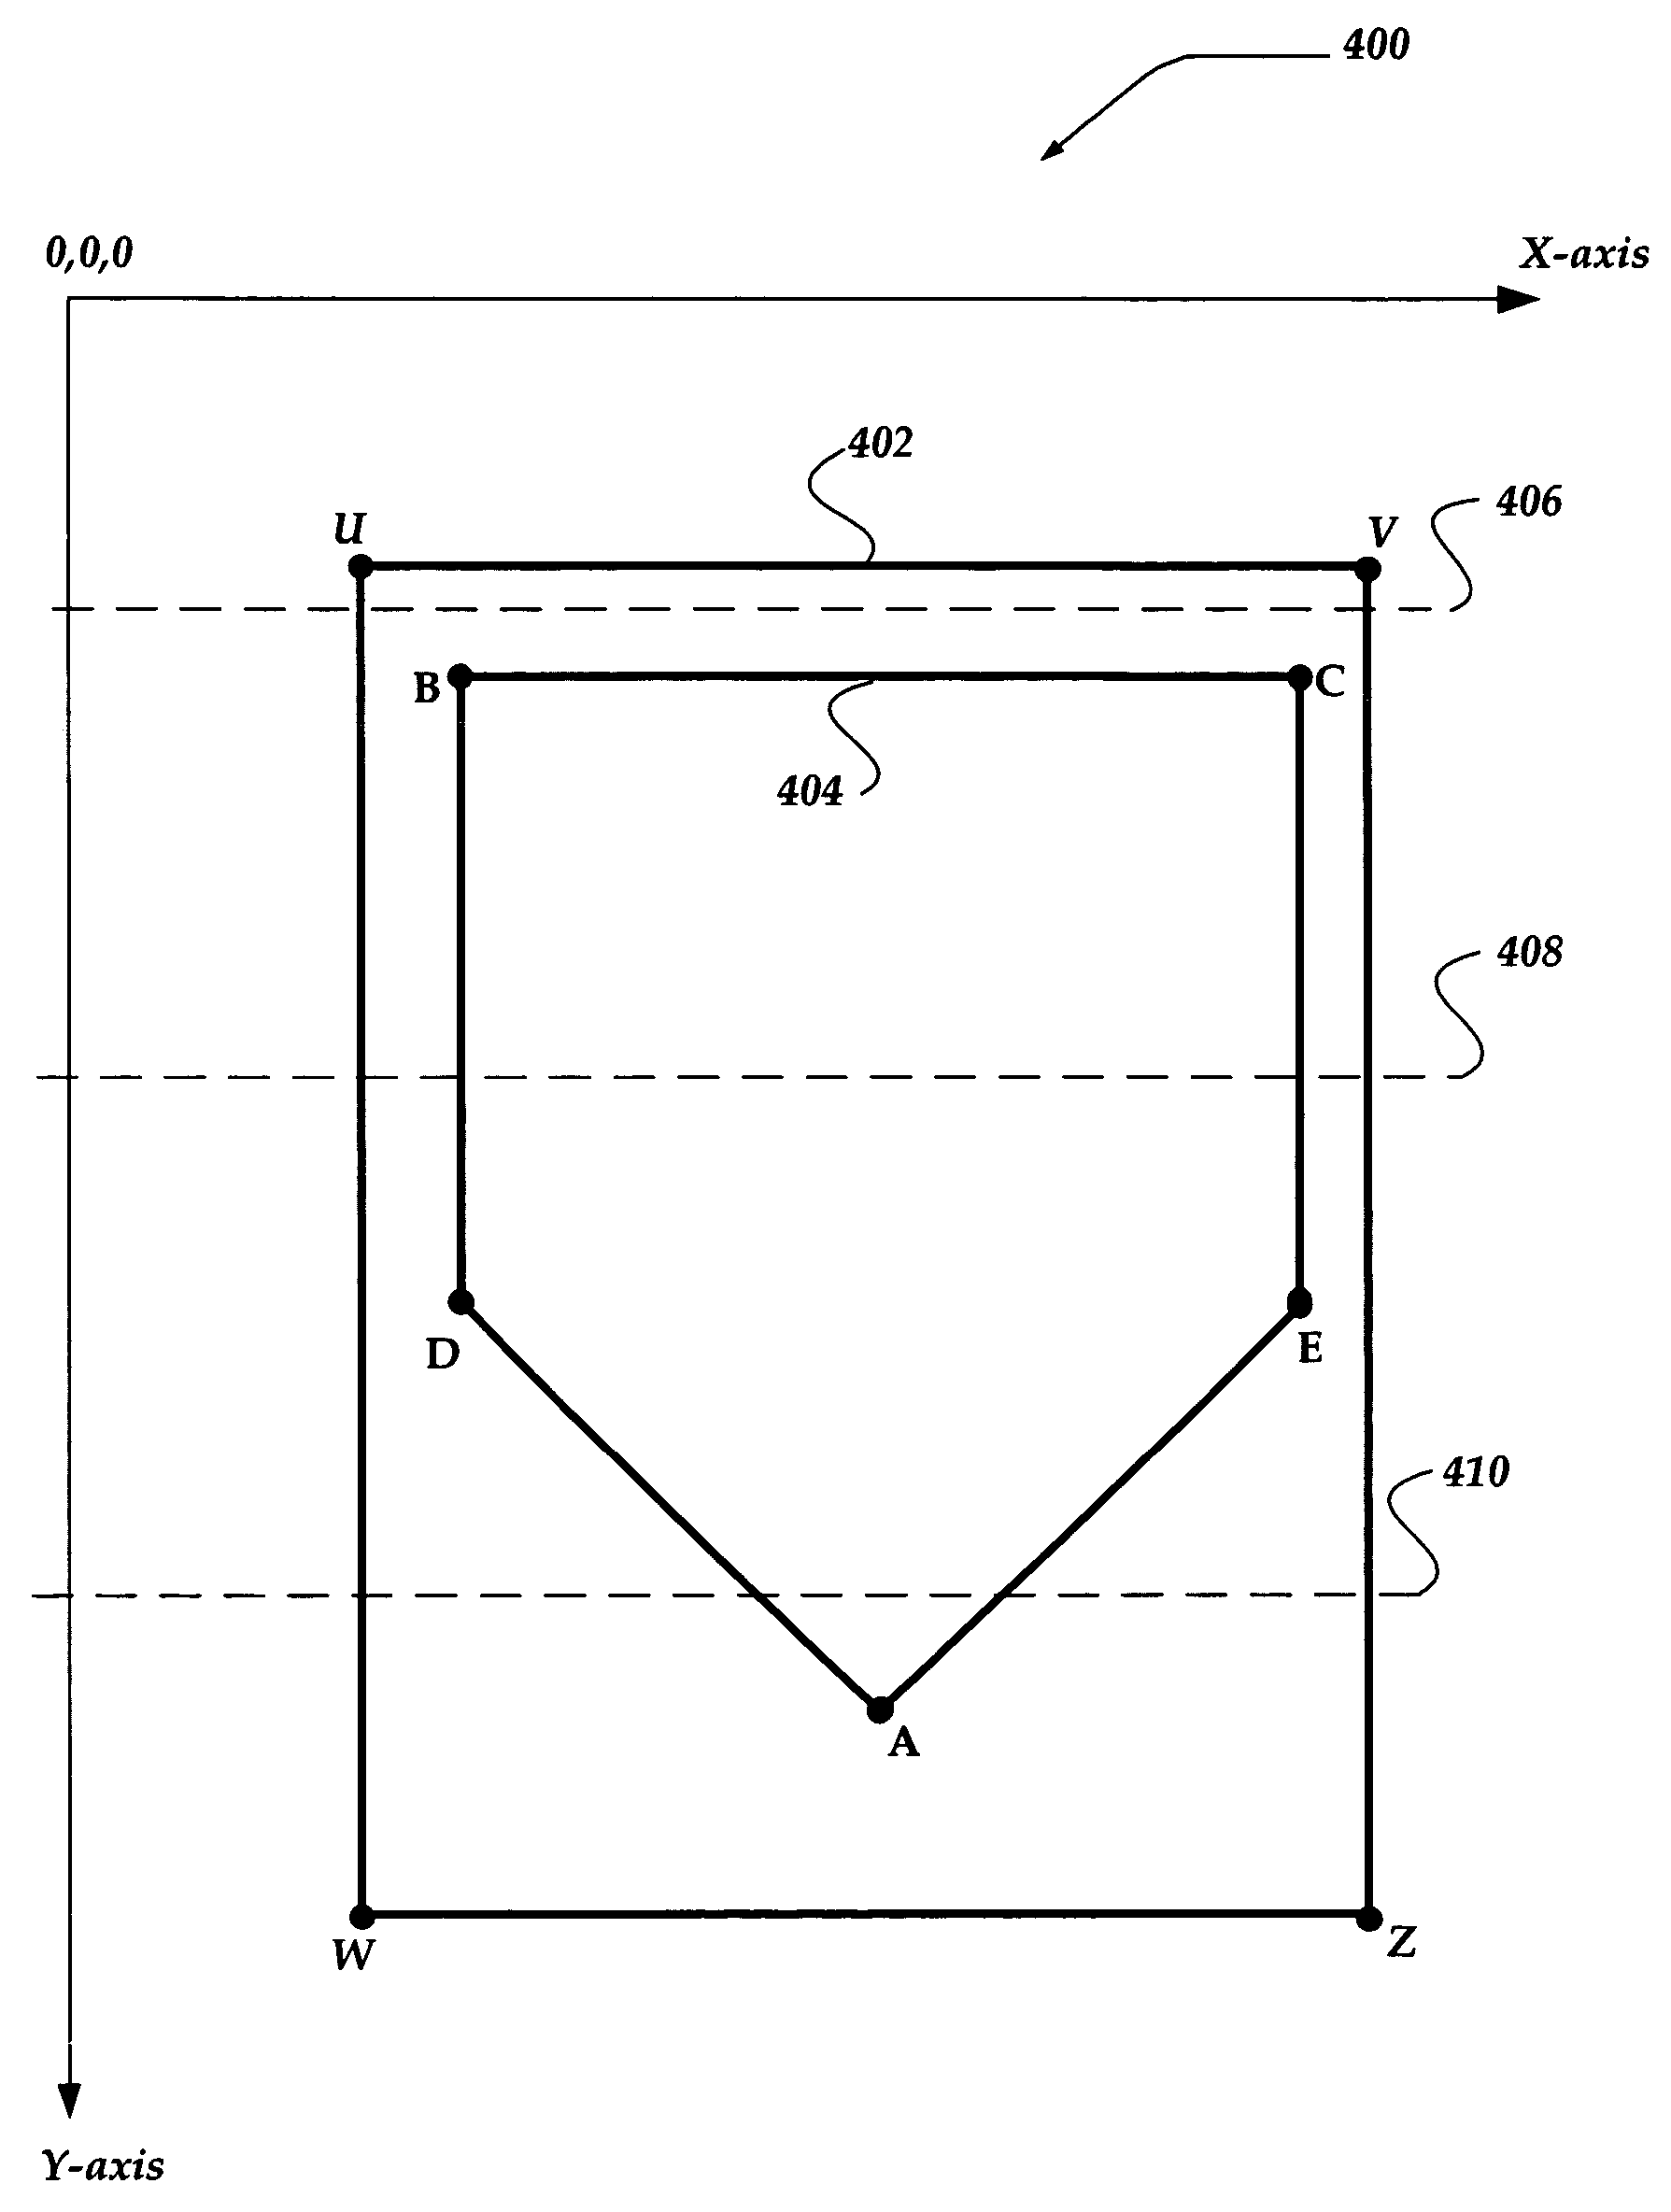 Method for accelerated determination of occlusion between polygons